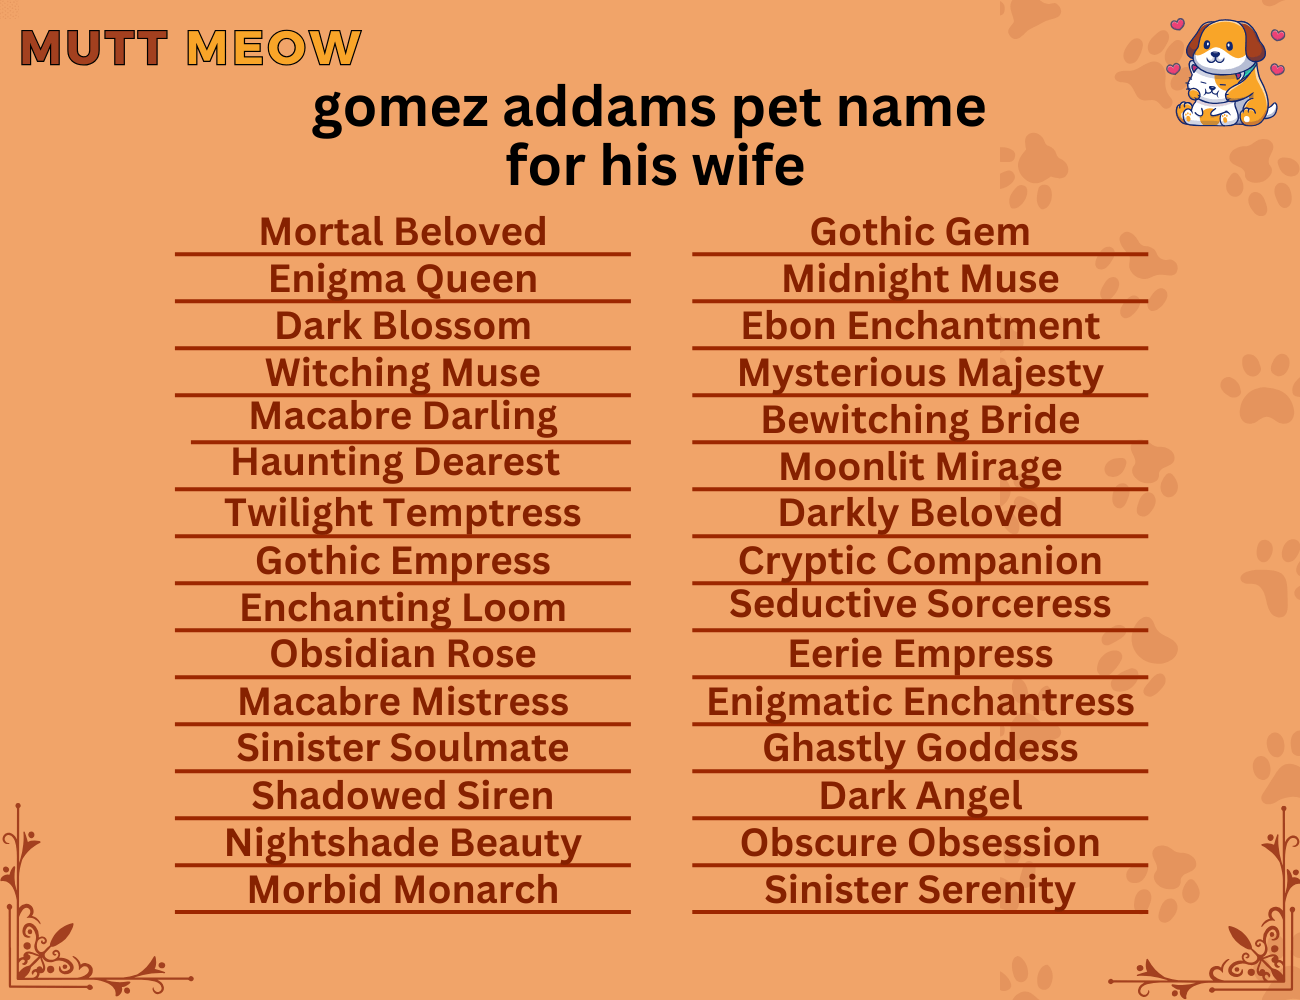 gomez addams pet name for his wife